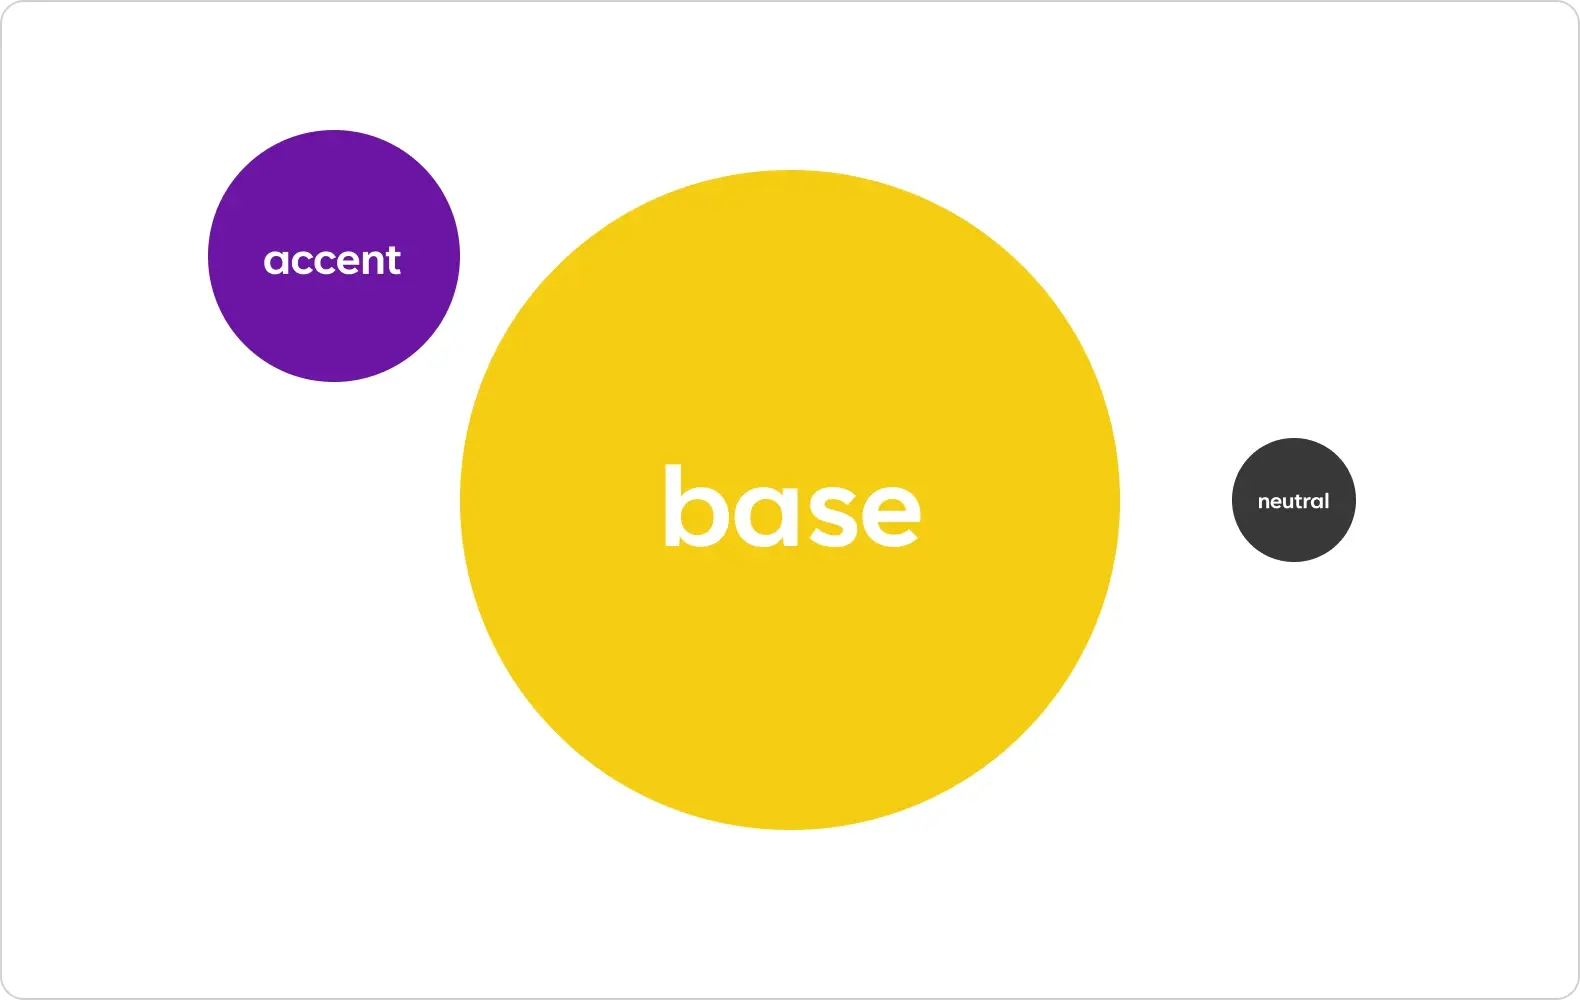 Illustration showing the recommended proportions of base, accent and neutral color when using brand colors.